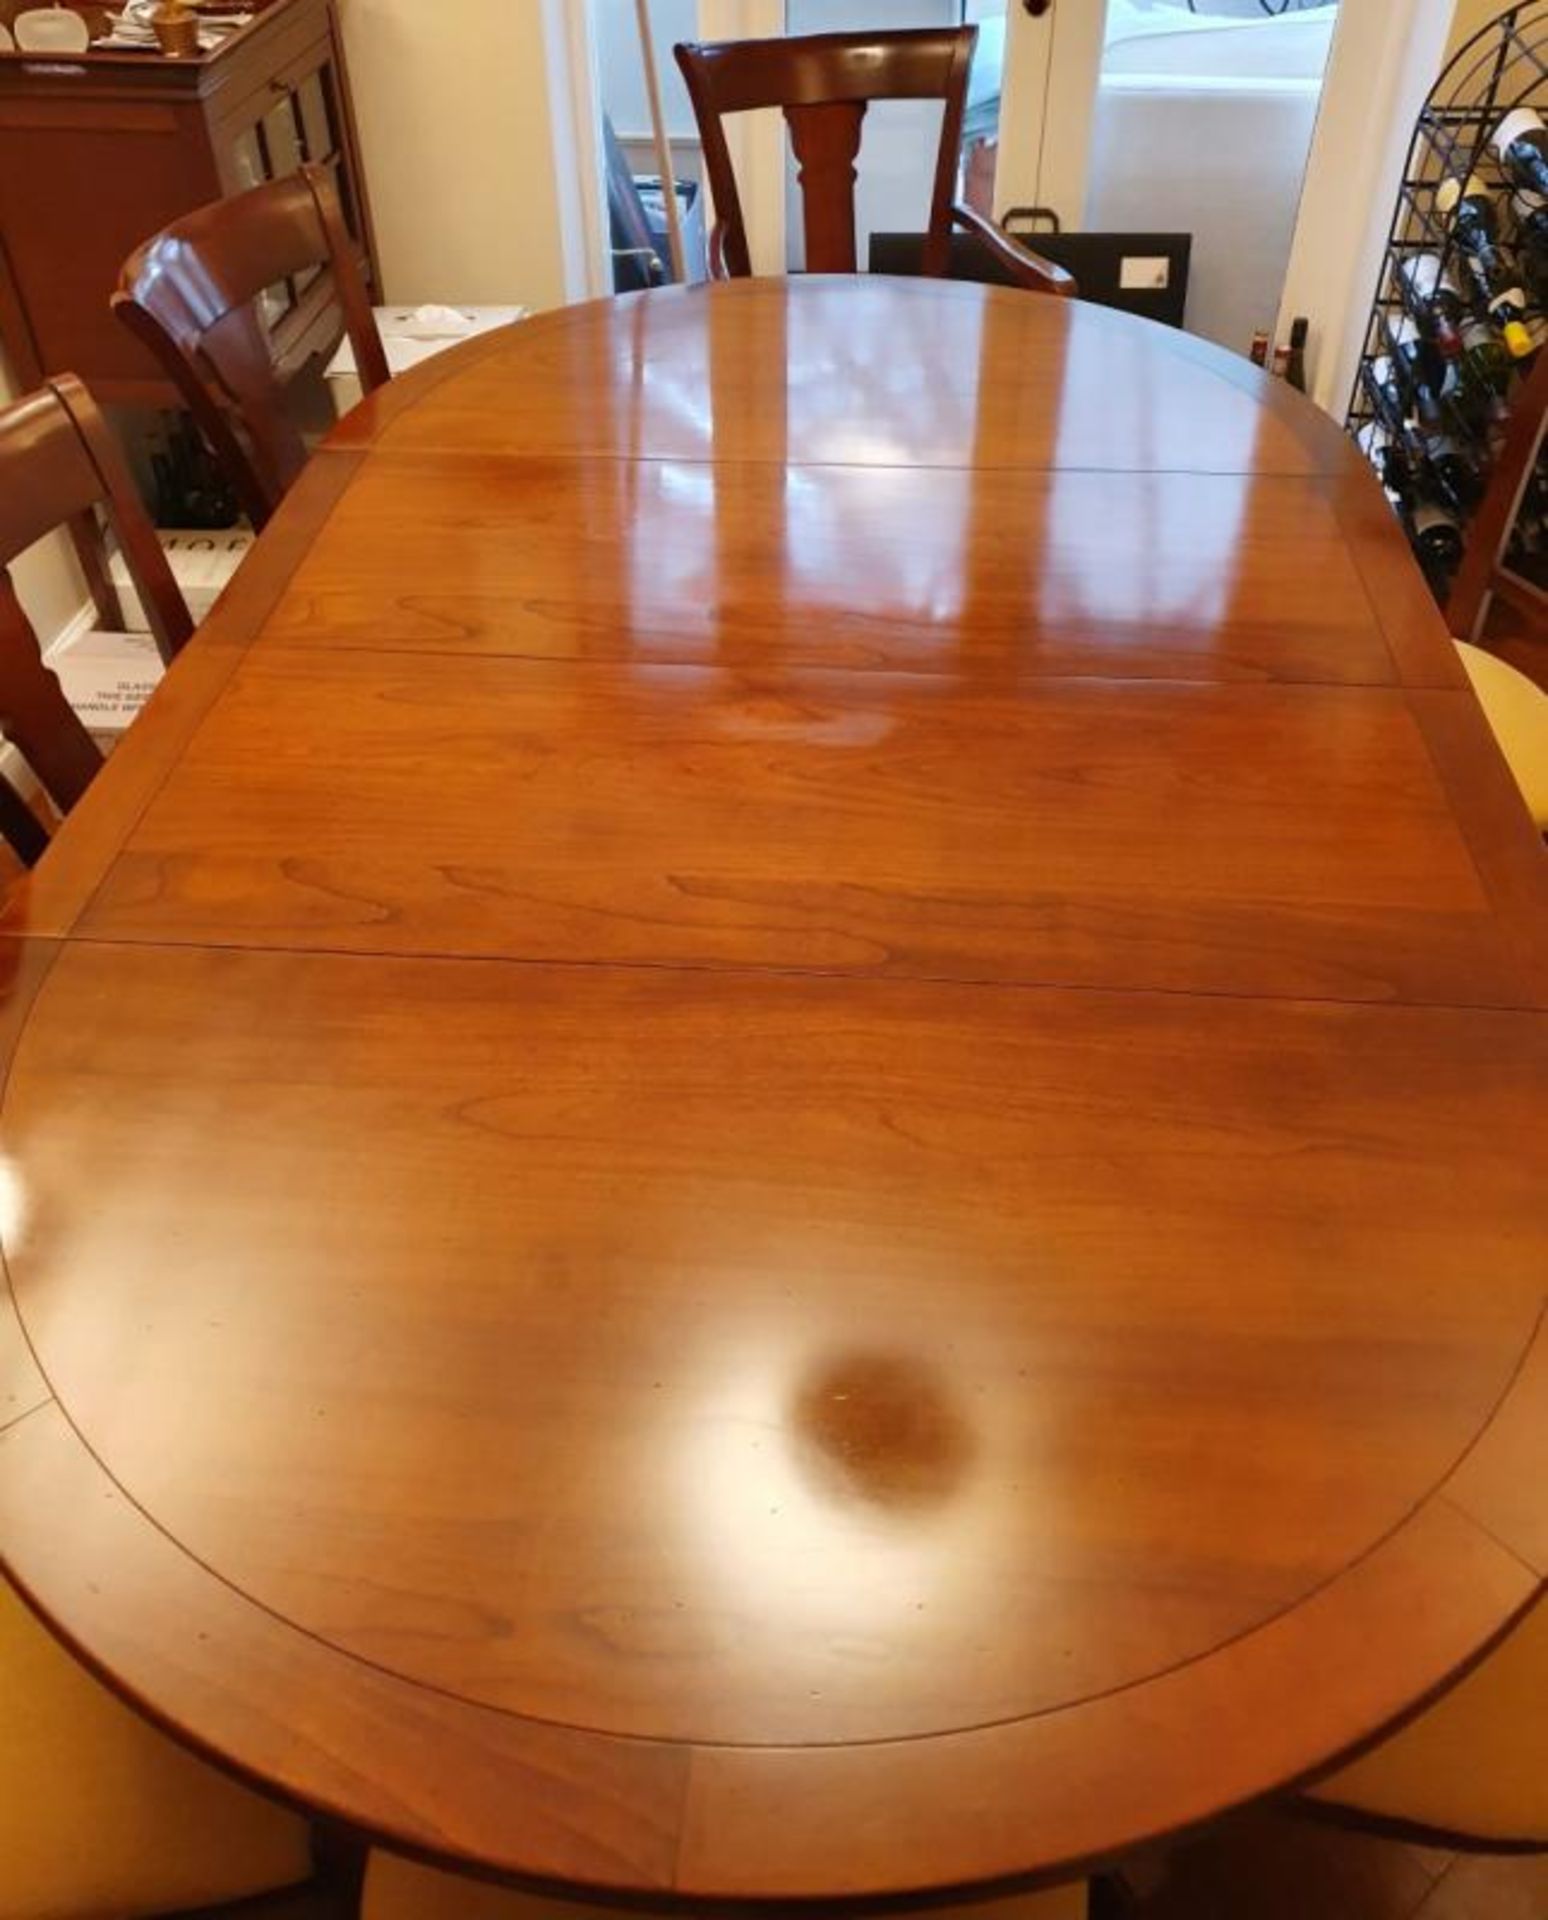 1 x GRANGE Dining Table in Solid Cherry Wood with 8 Matching Chairs - CL473 - Location: Bowdon WA14 - Image 7 of 18